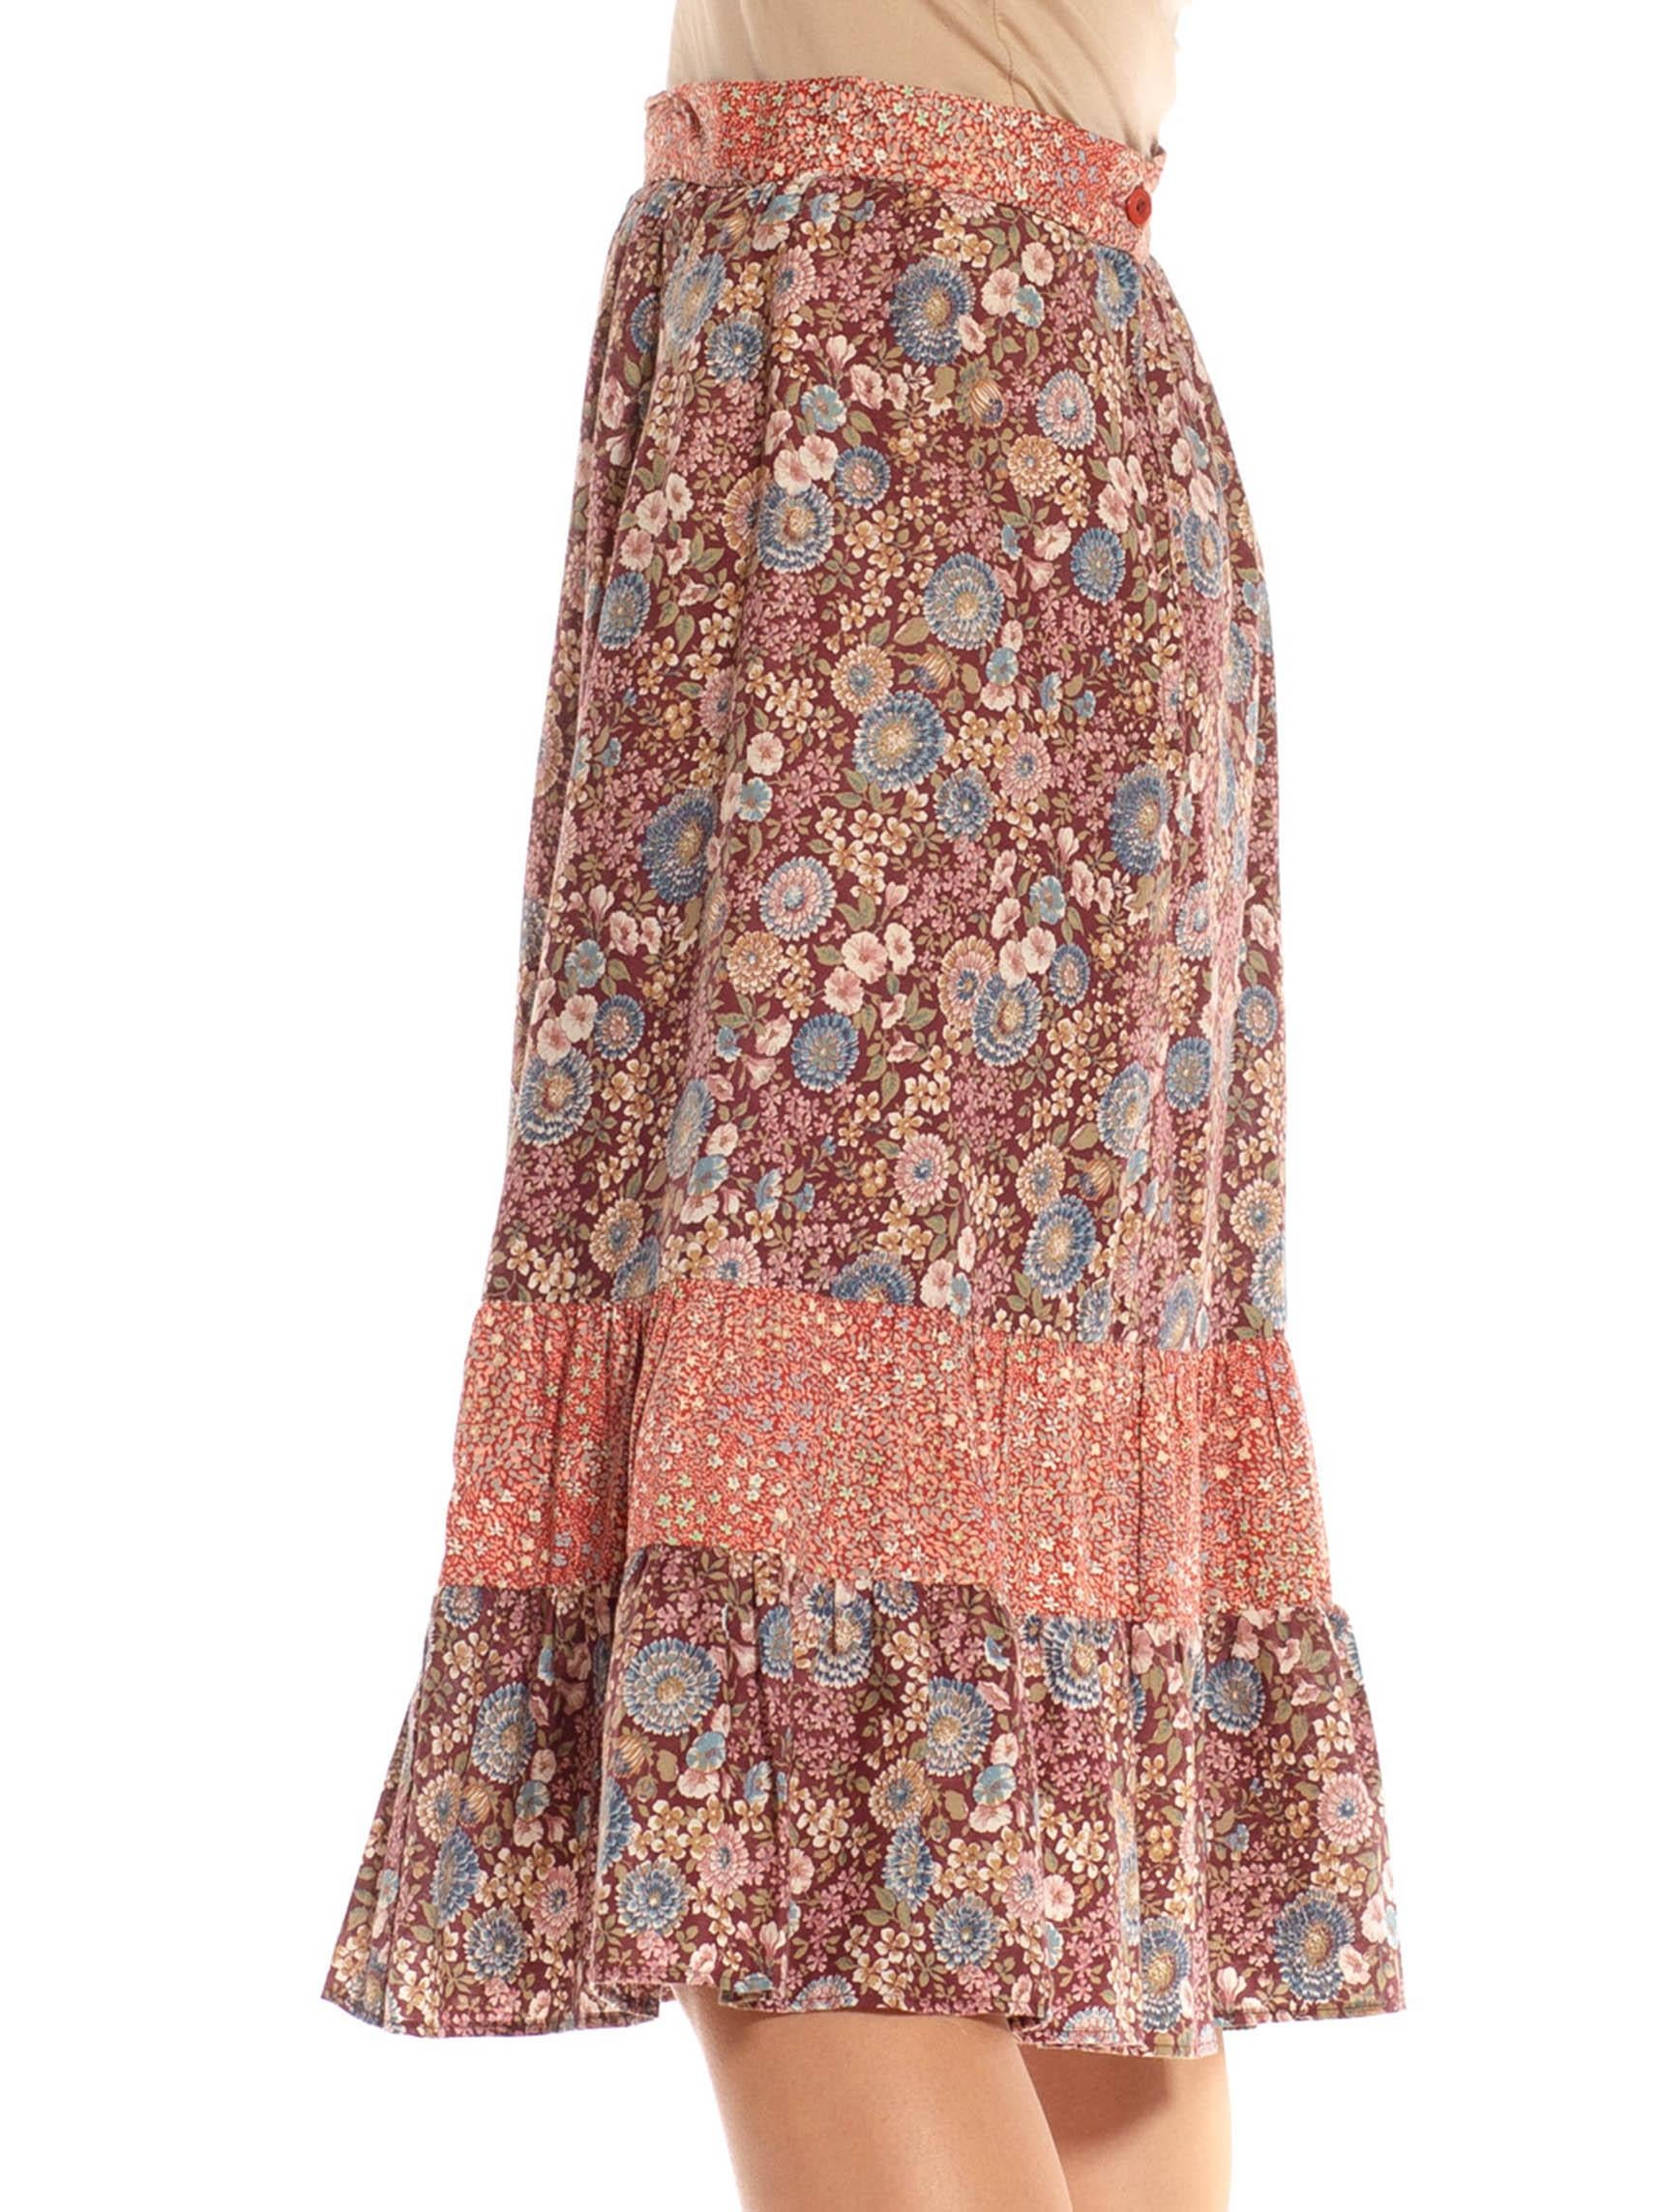 1970S Burgundy & Dusty Pink Cotton Ditsy Floral Print Mix Skirt For Sale 2